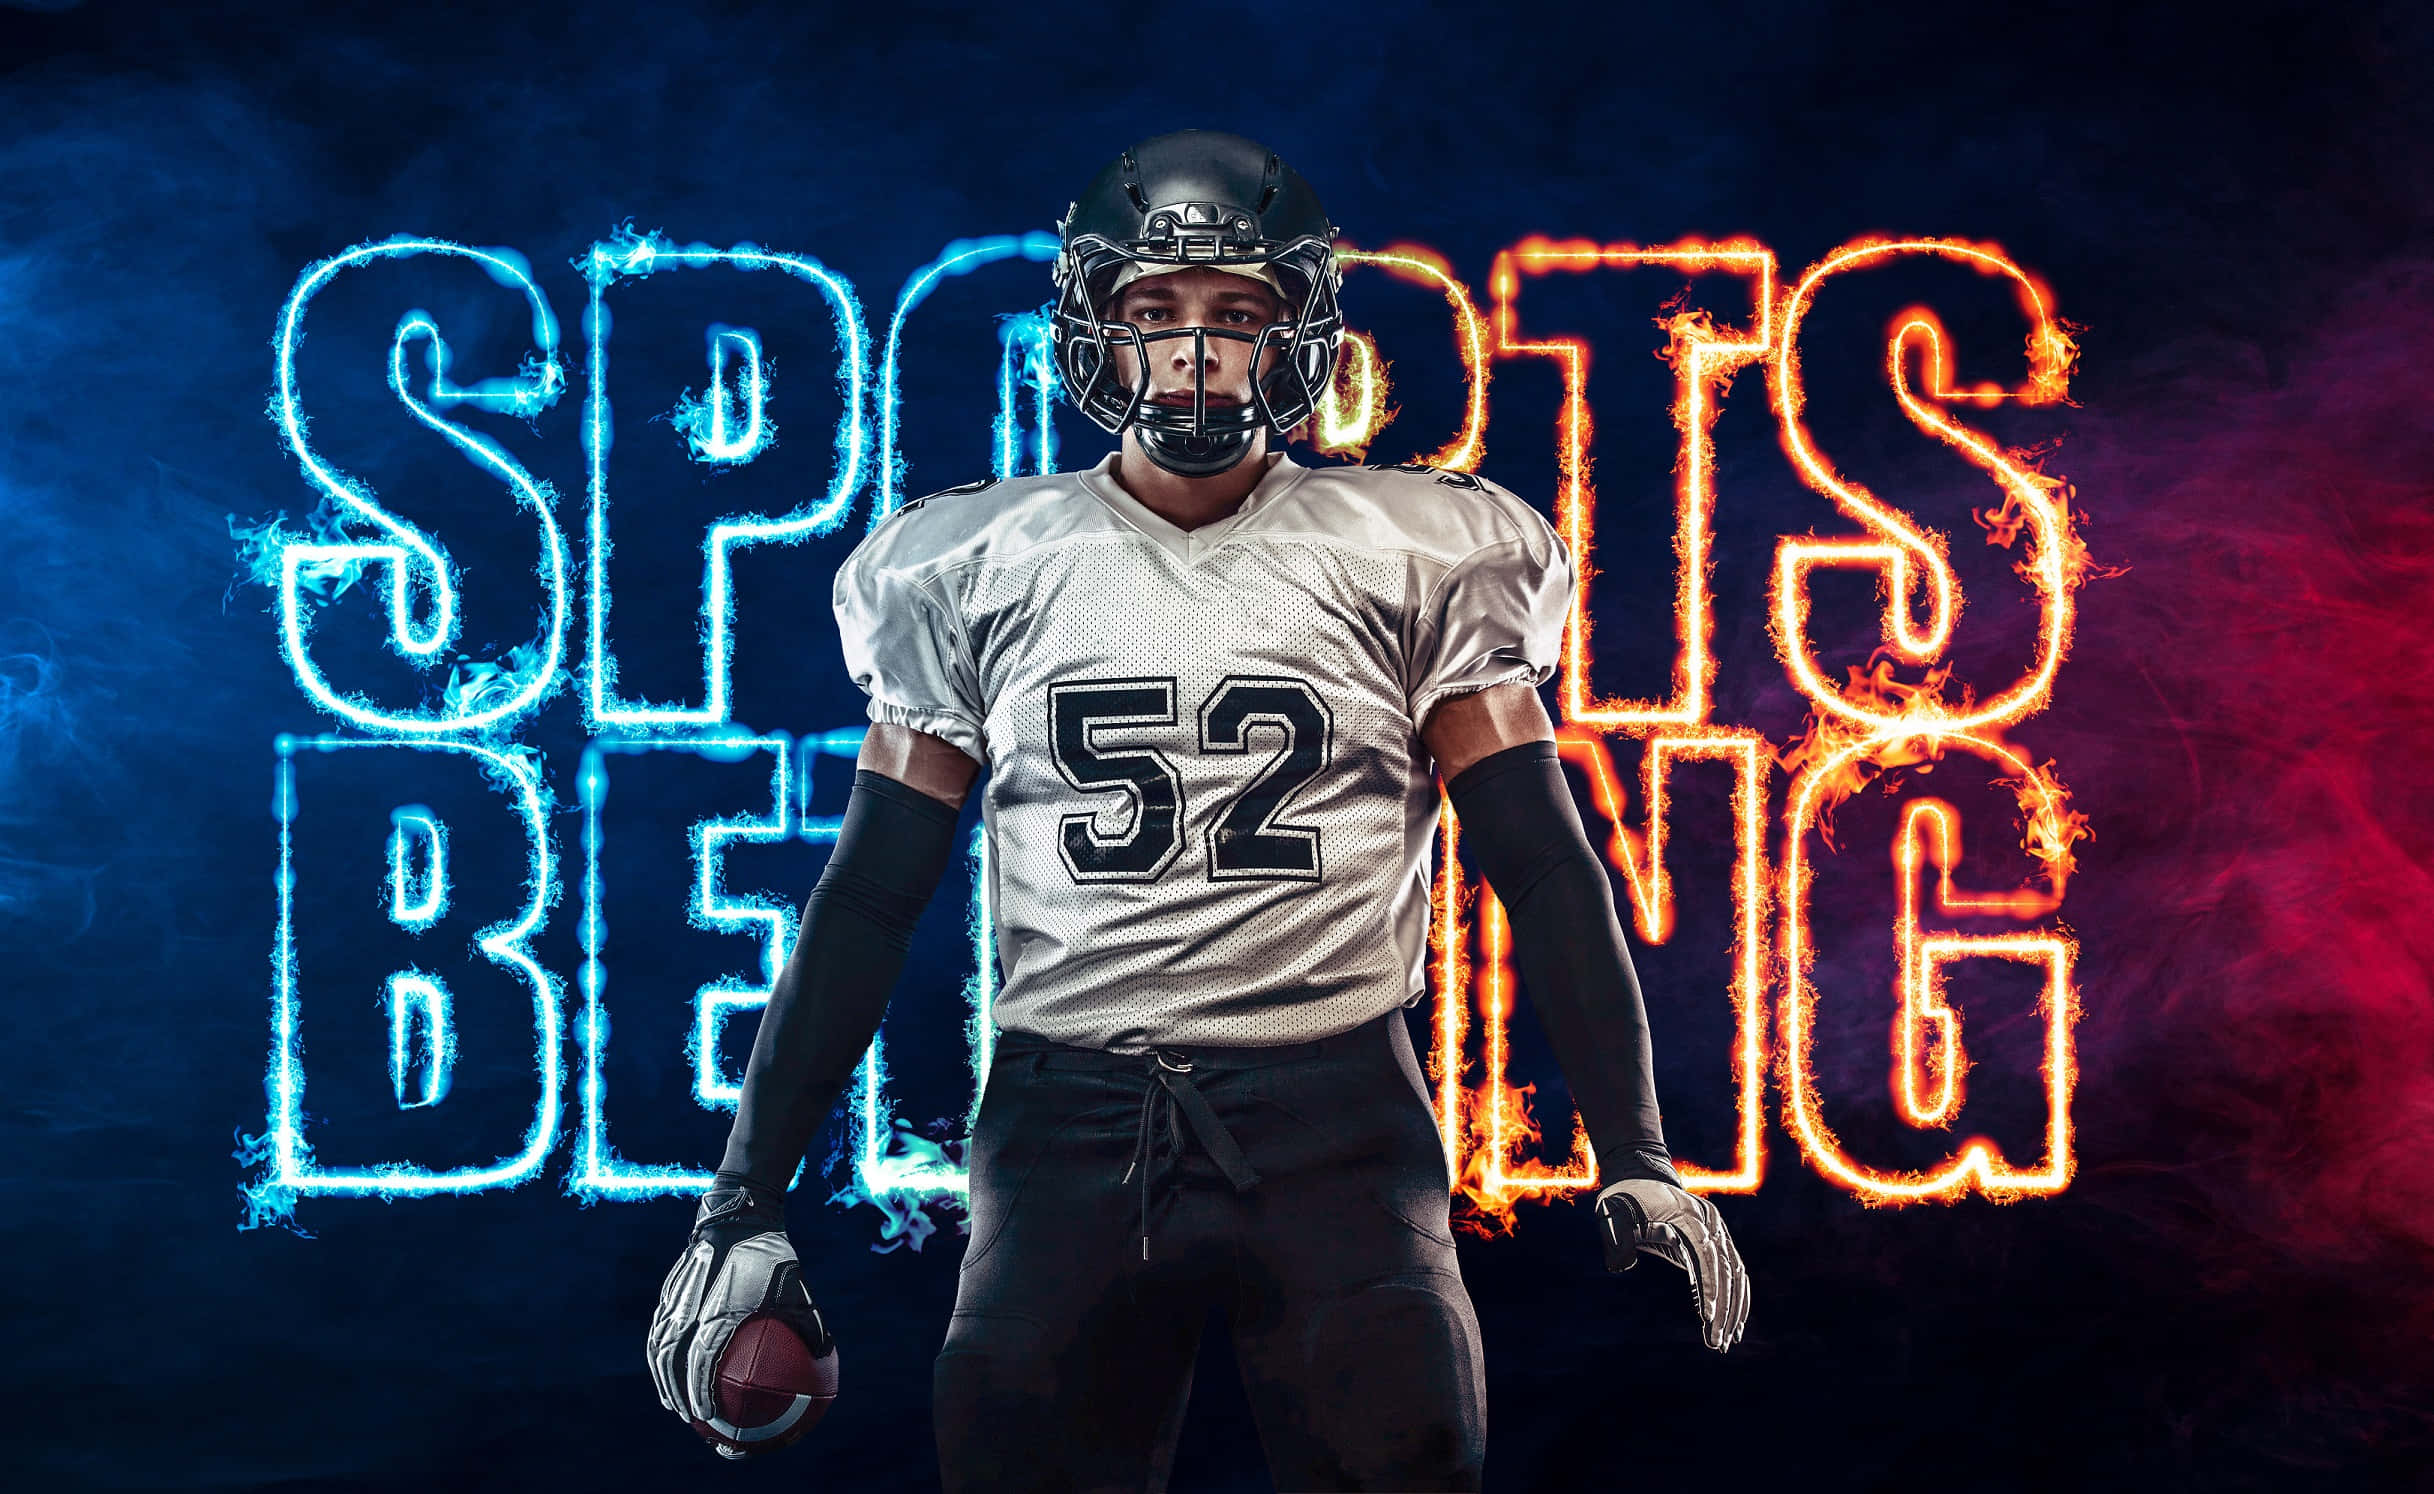 100+] Best Sports Backgrounds